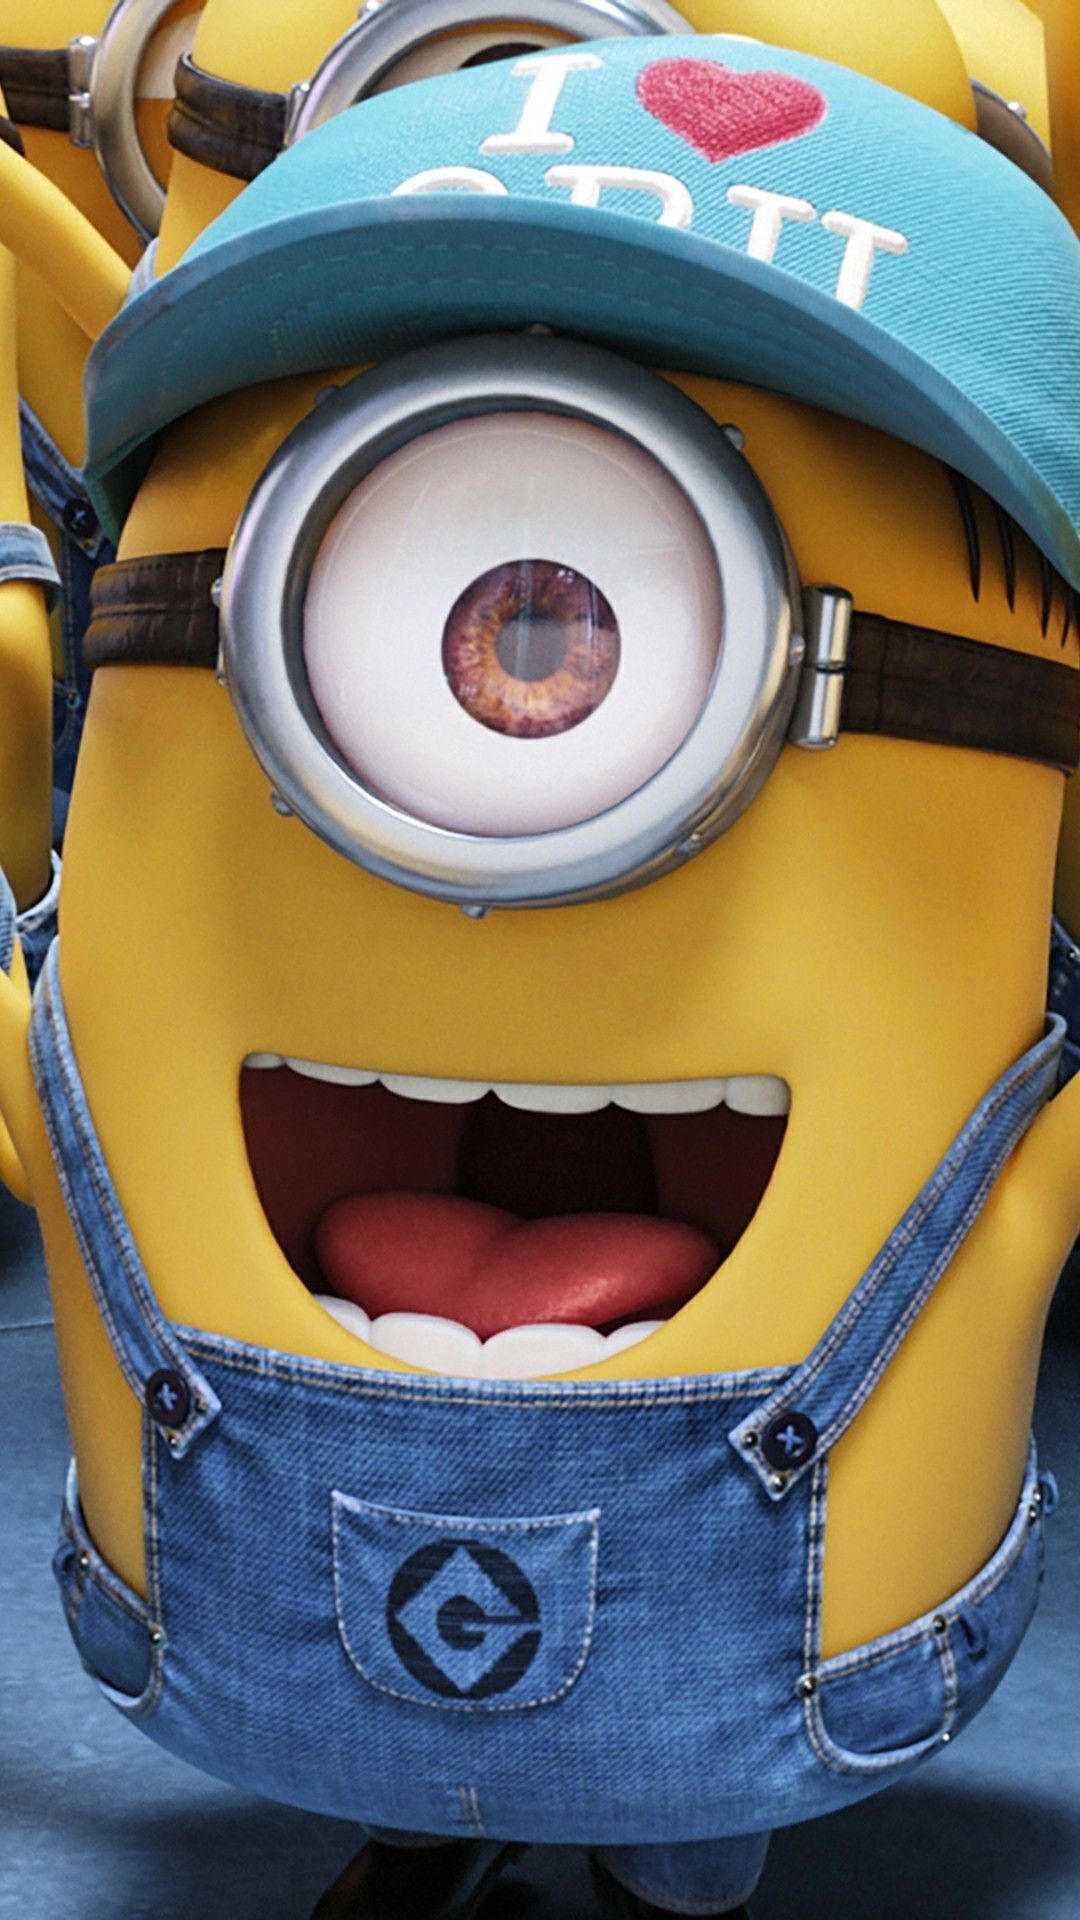 Wallpaper Minion For iPhone Me 3